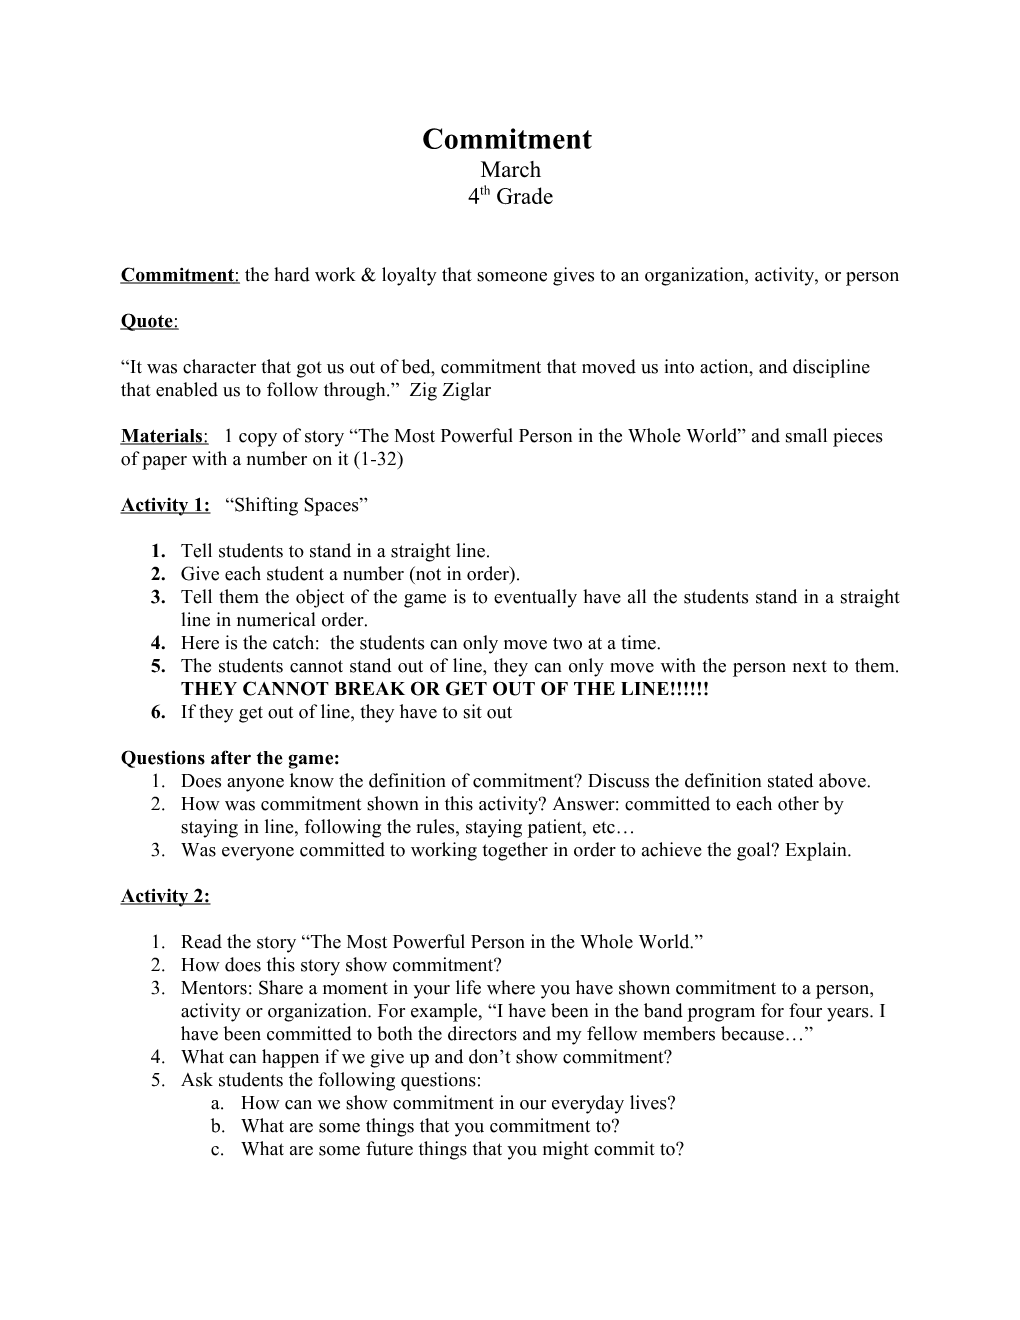 Commitment: Lesson Plan for Fourth Grade